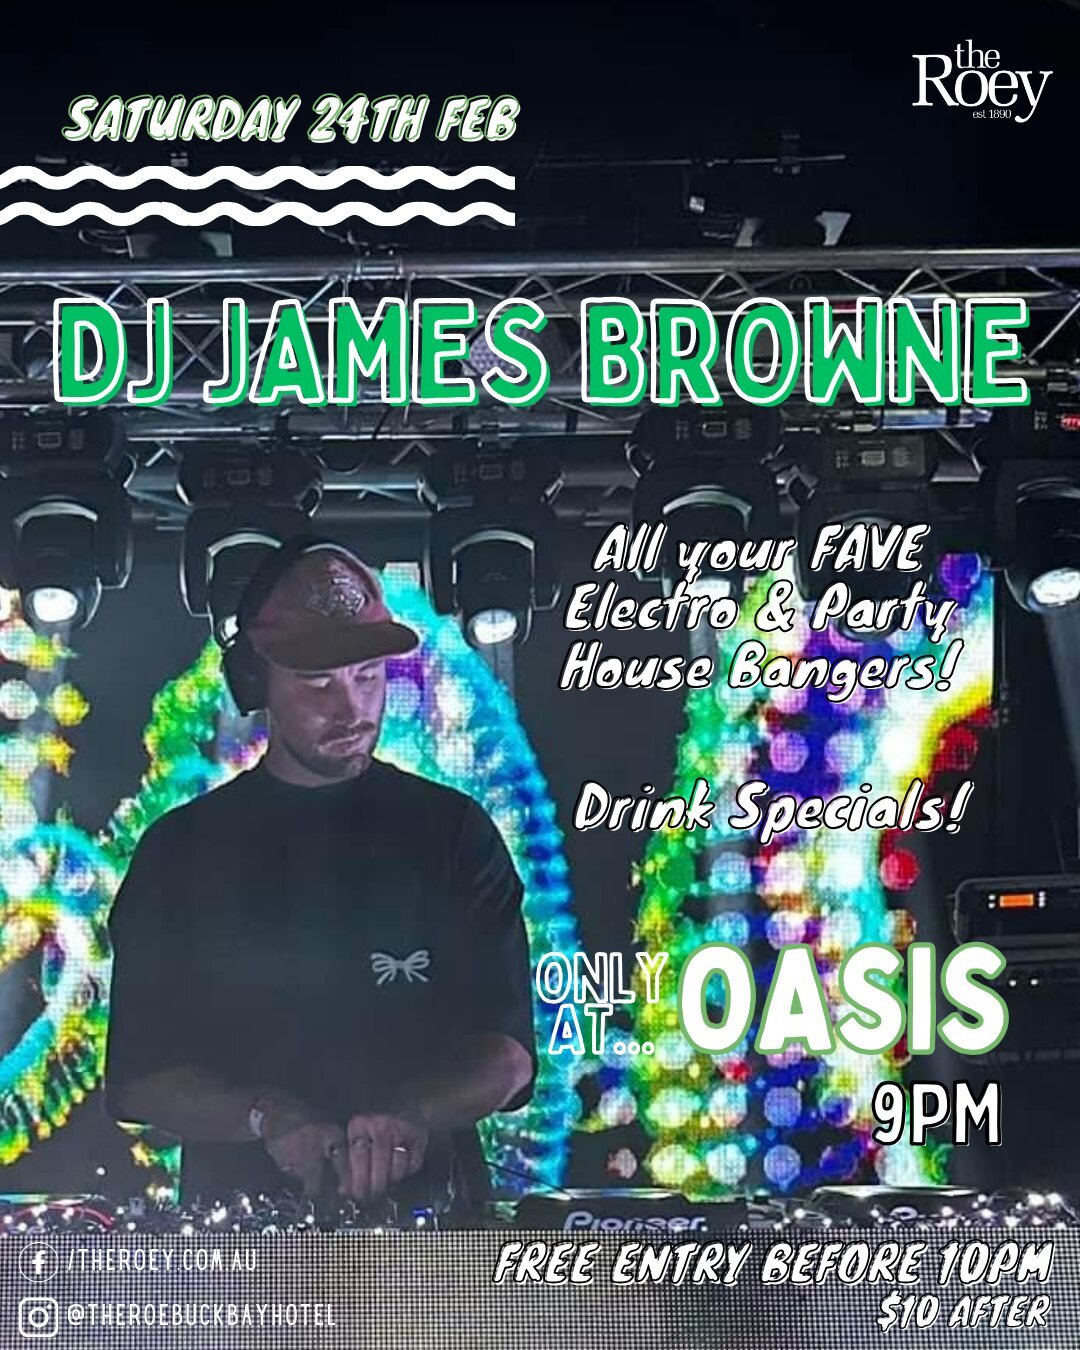 Attn PARTY CREW!

Your DJ for this week at The Roey is DJ JAMES BROWNE 🎧

You can catch him mixing up alllll your fave party beats at the following events this week:

💦 THURS - Wet Tee @ Oasis
🍻 FRI - Friday Beats @ Sports Bar
🪩 SAT - Oasis Dance